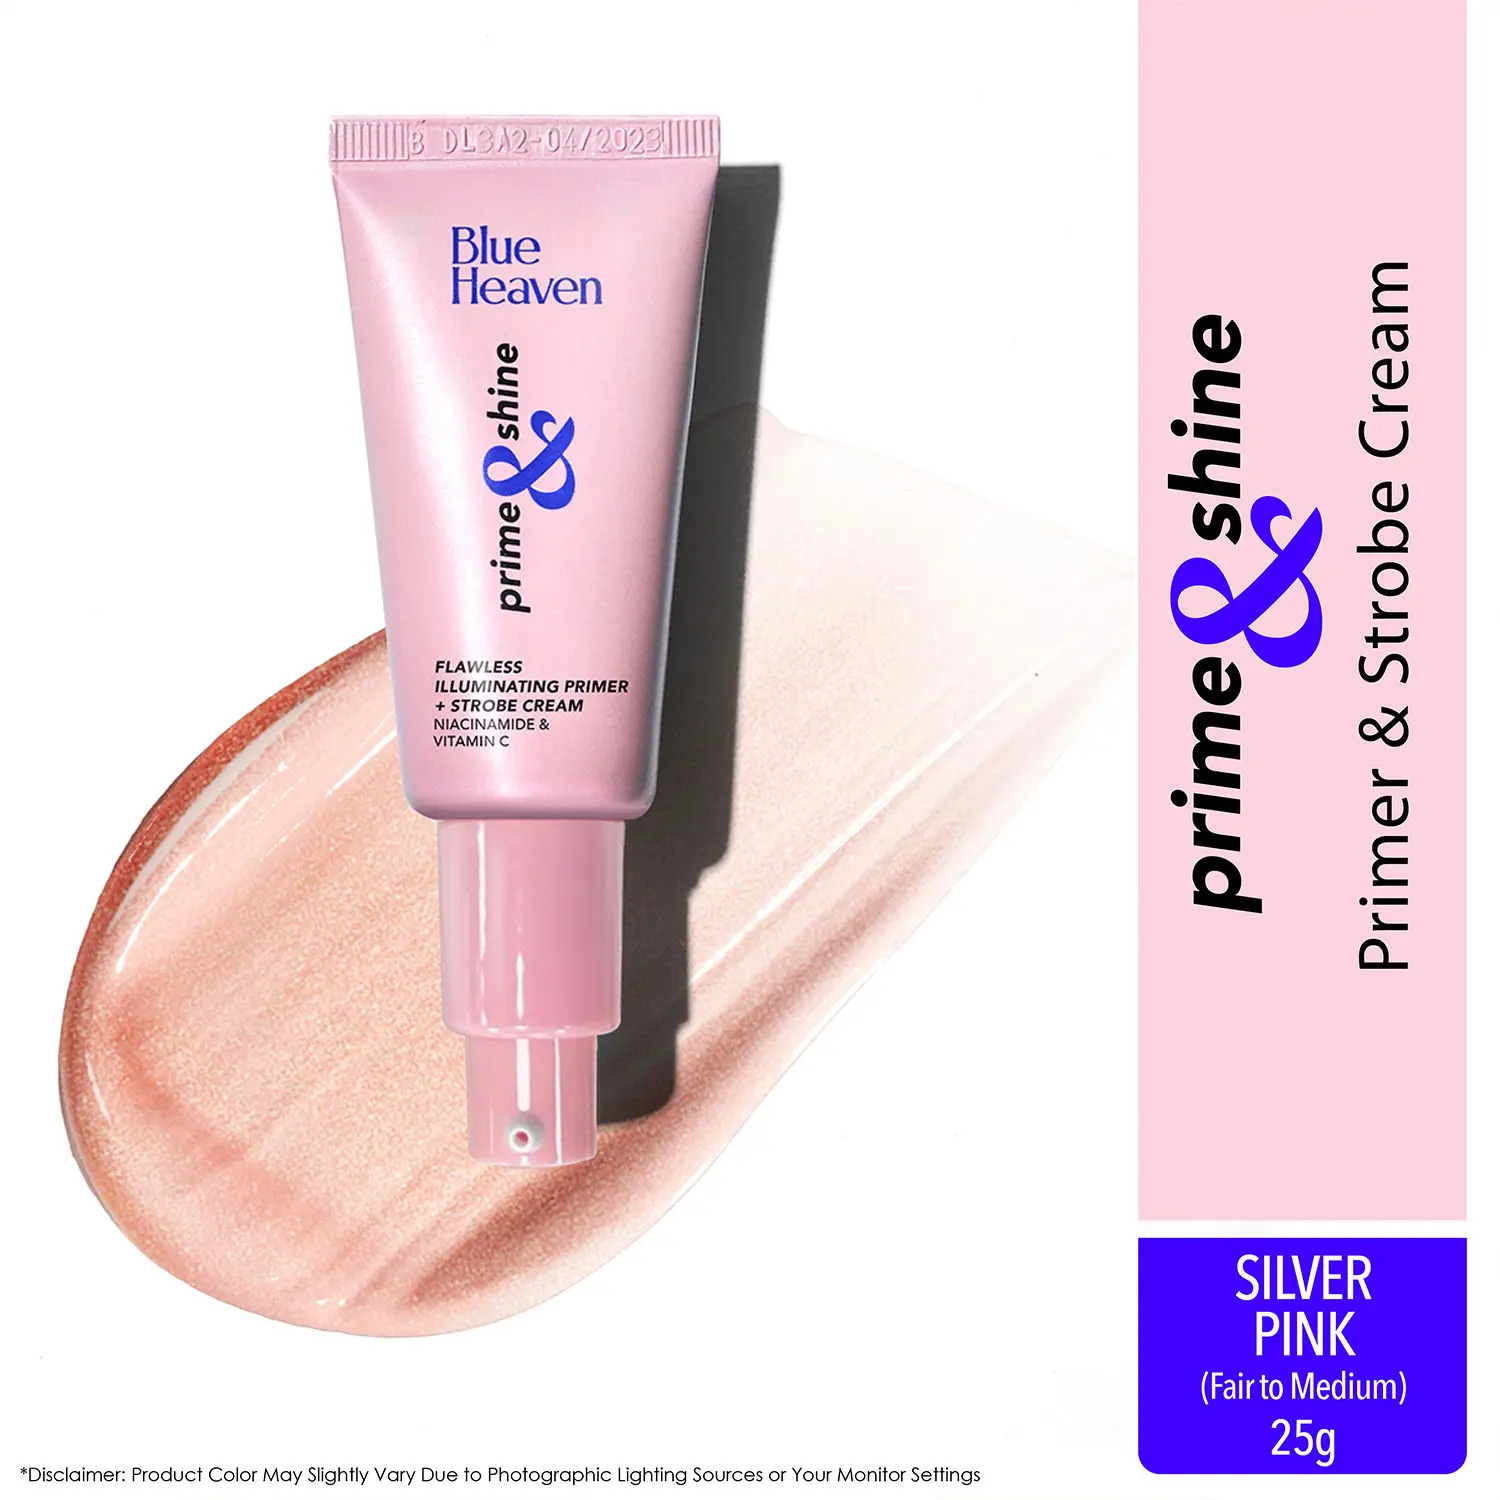 Blue Heaven Prime & Shine Flawless Illuminating Primer + Strobe Cream | Primer + Highlighter + Moisturiser |Infused with Vitamin C and Niacinamide for naturally glowing skin, Silver Pink, 25g